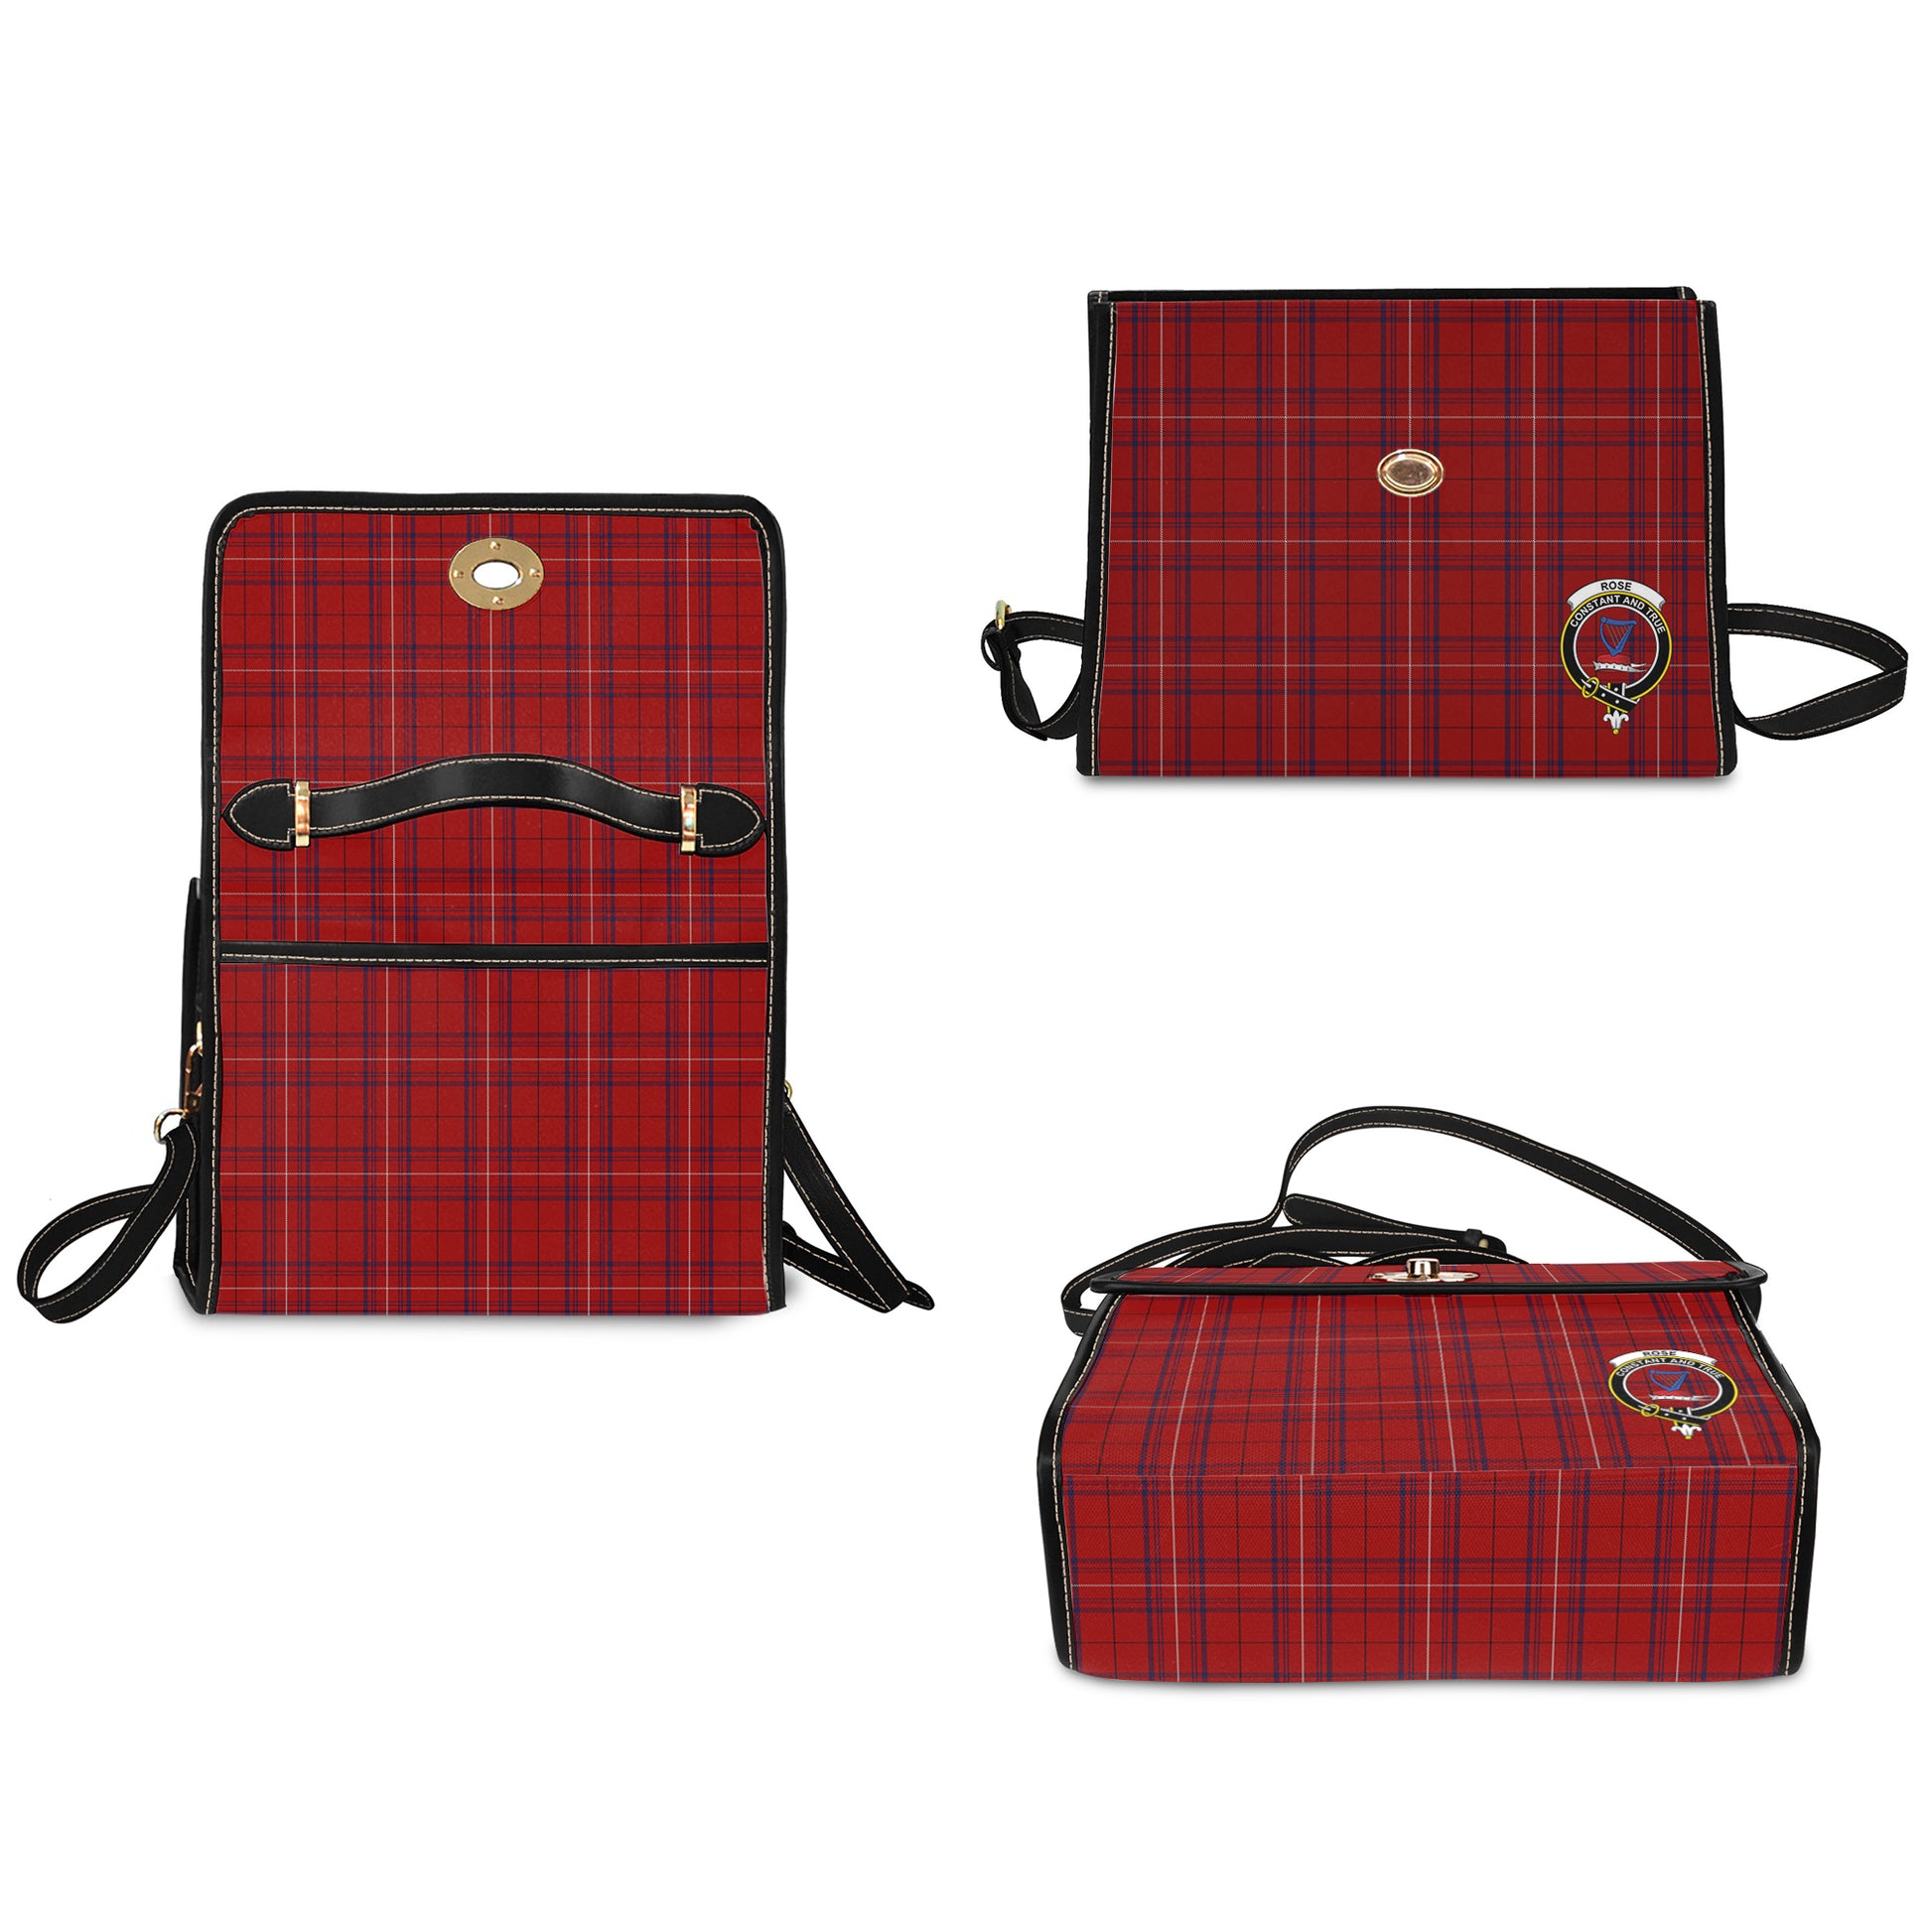 rose-of-kilravock-tartan-leather-strap-waterproof-canvas-bag-with-family-crest